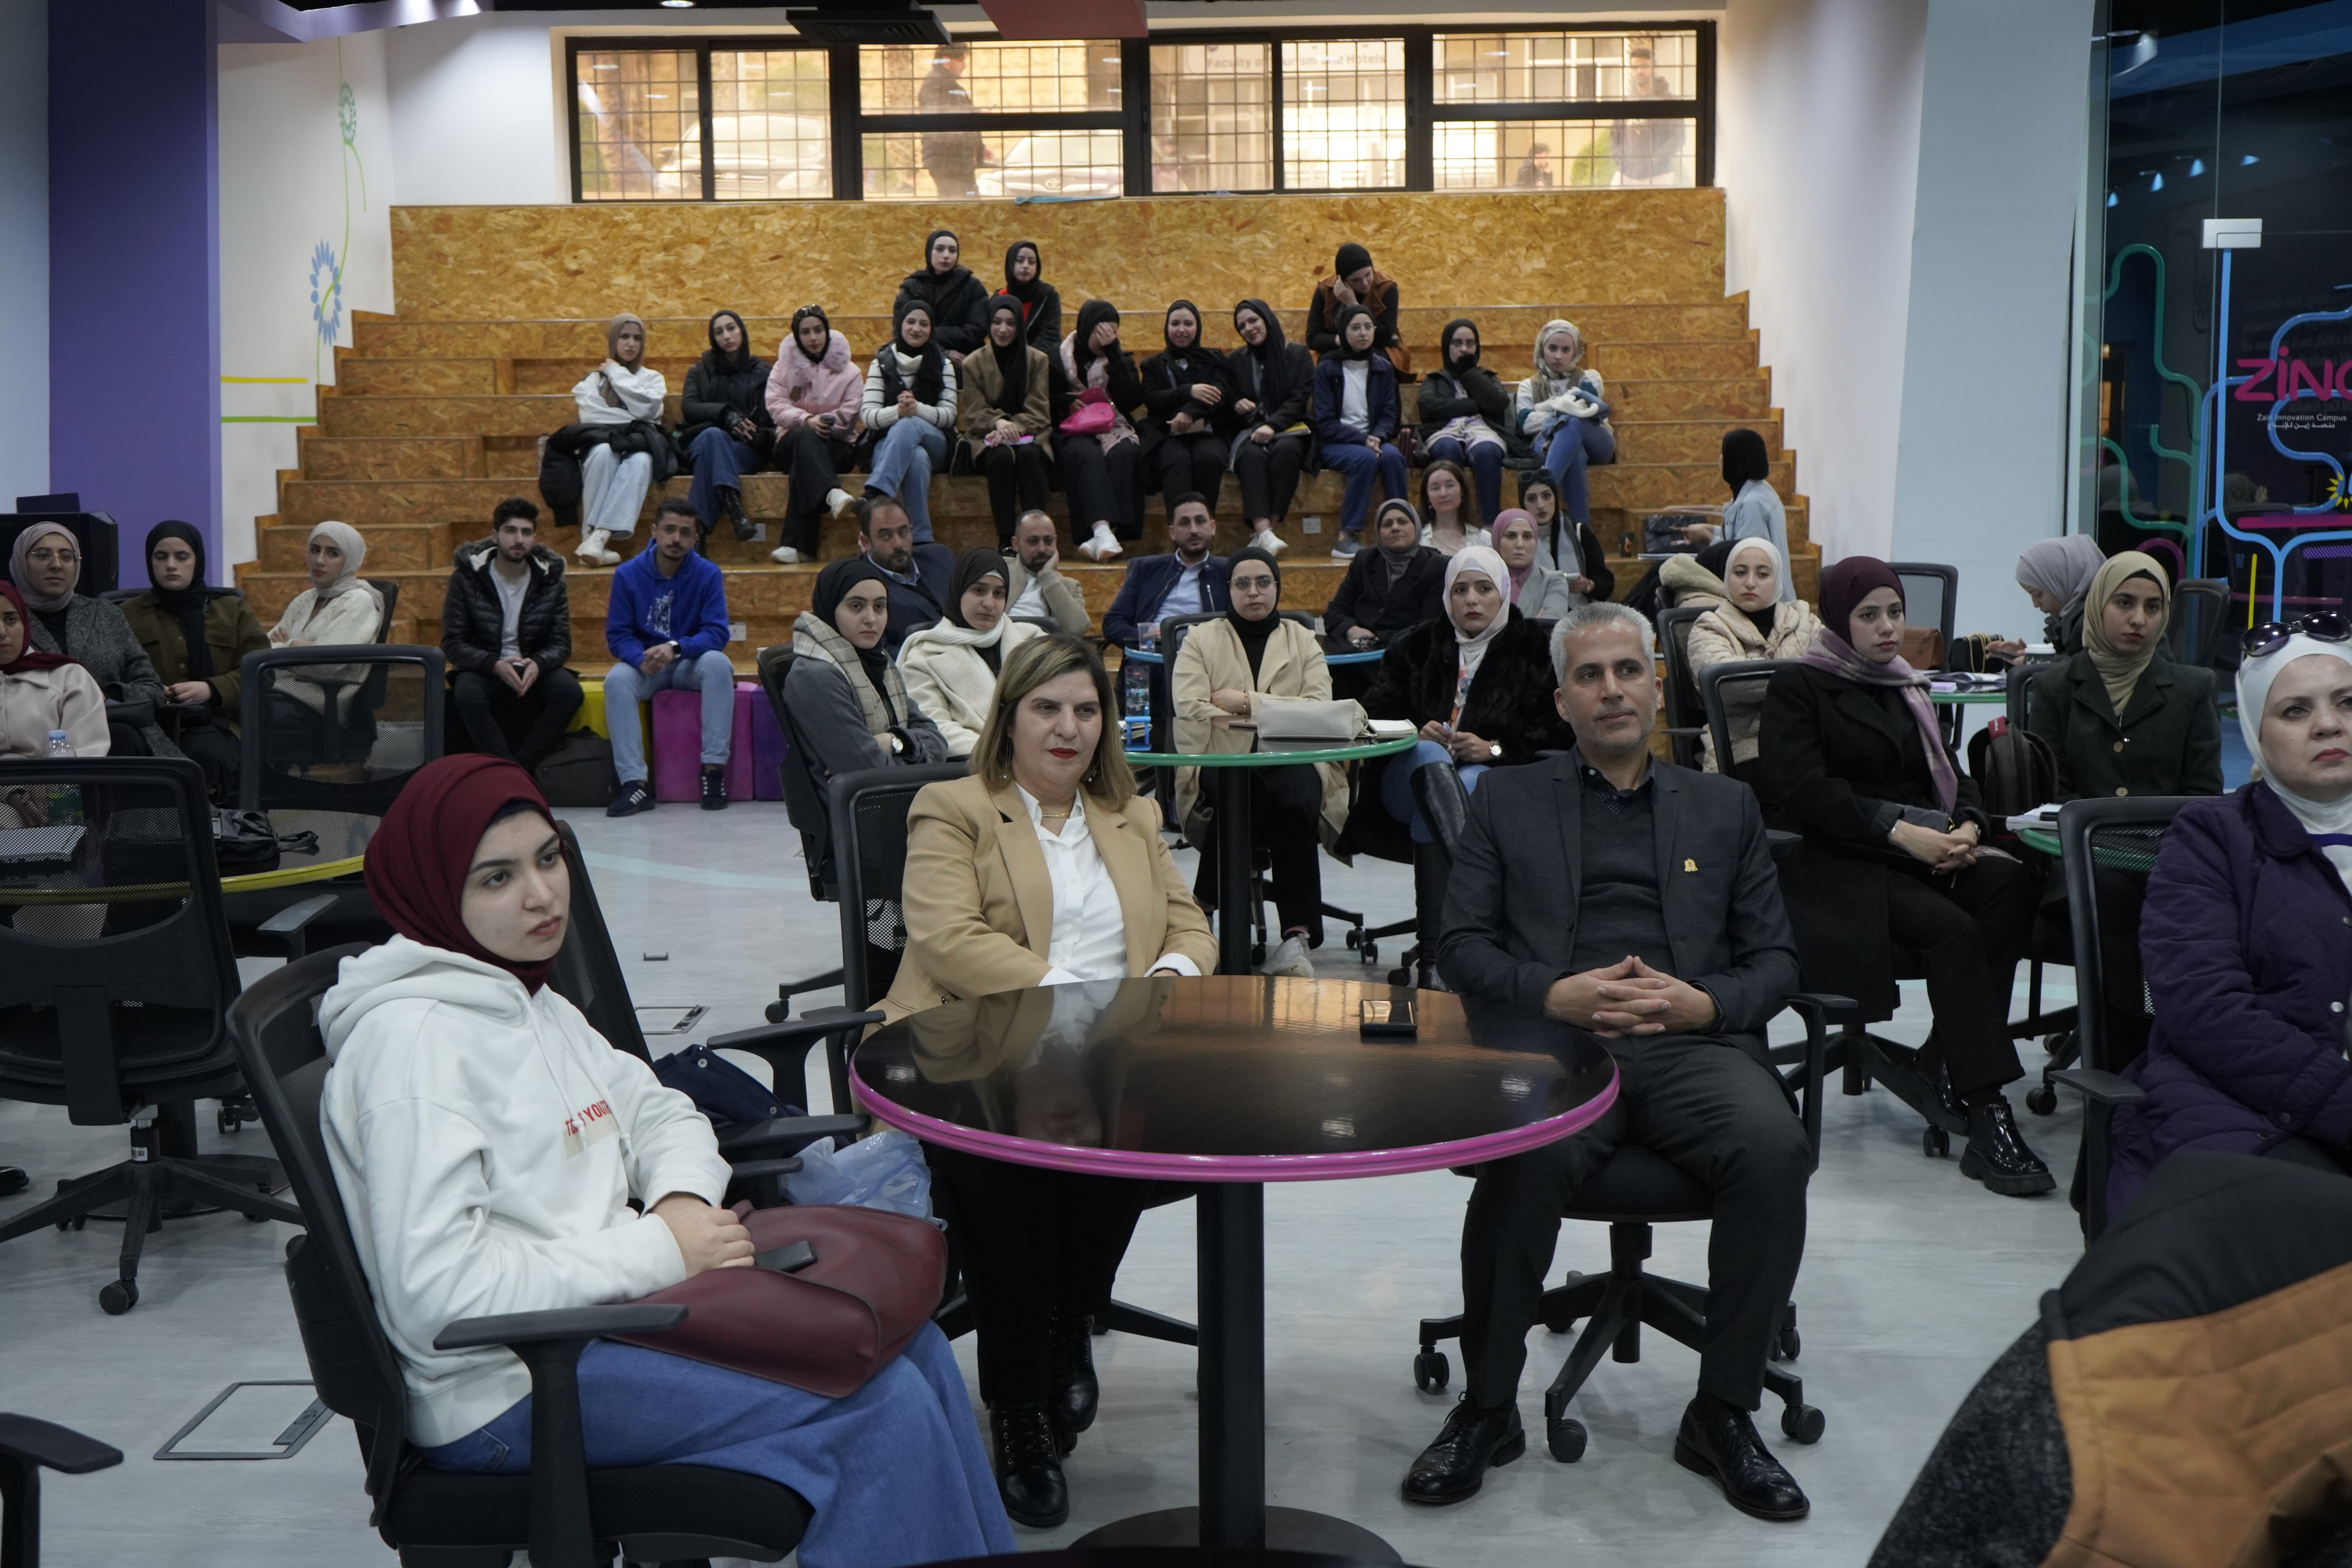 The Refugee Center Organizes a Meeting Entitled “Journey of Hope”